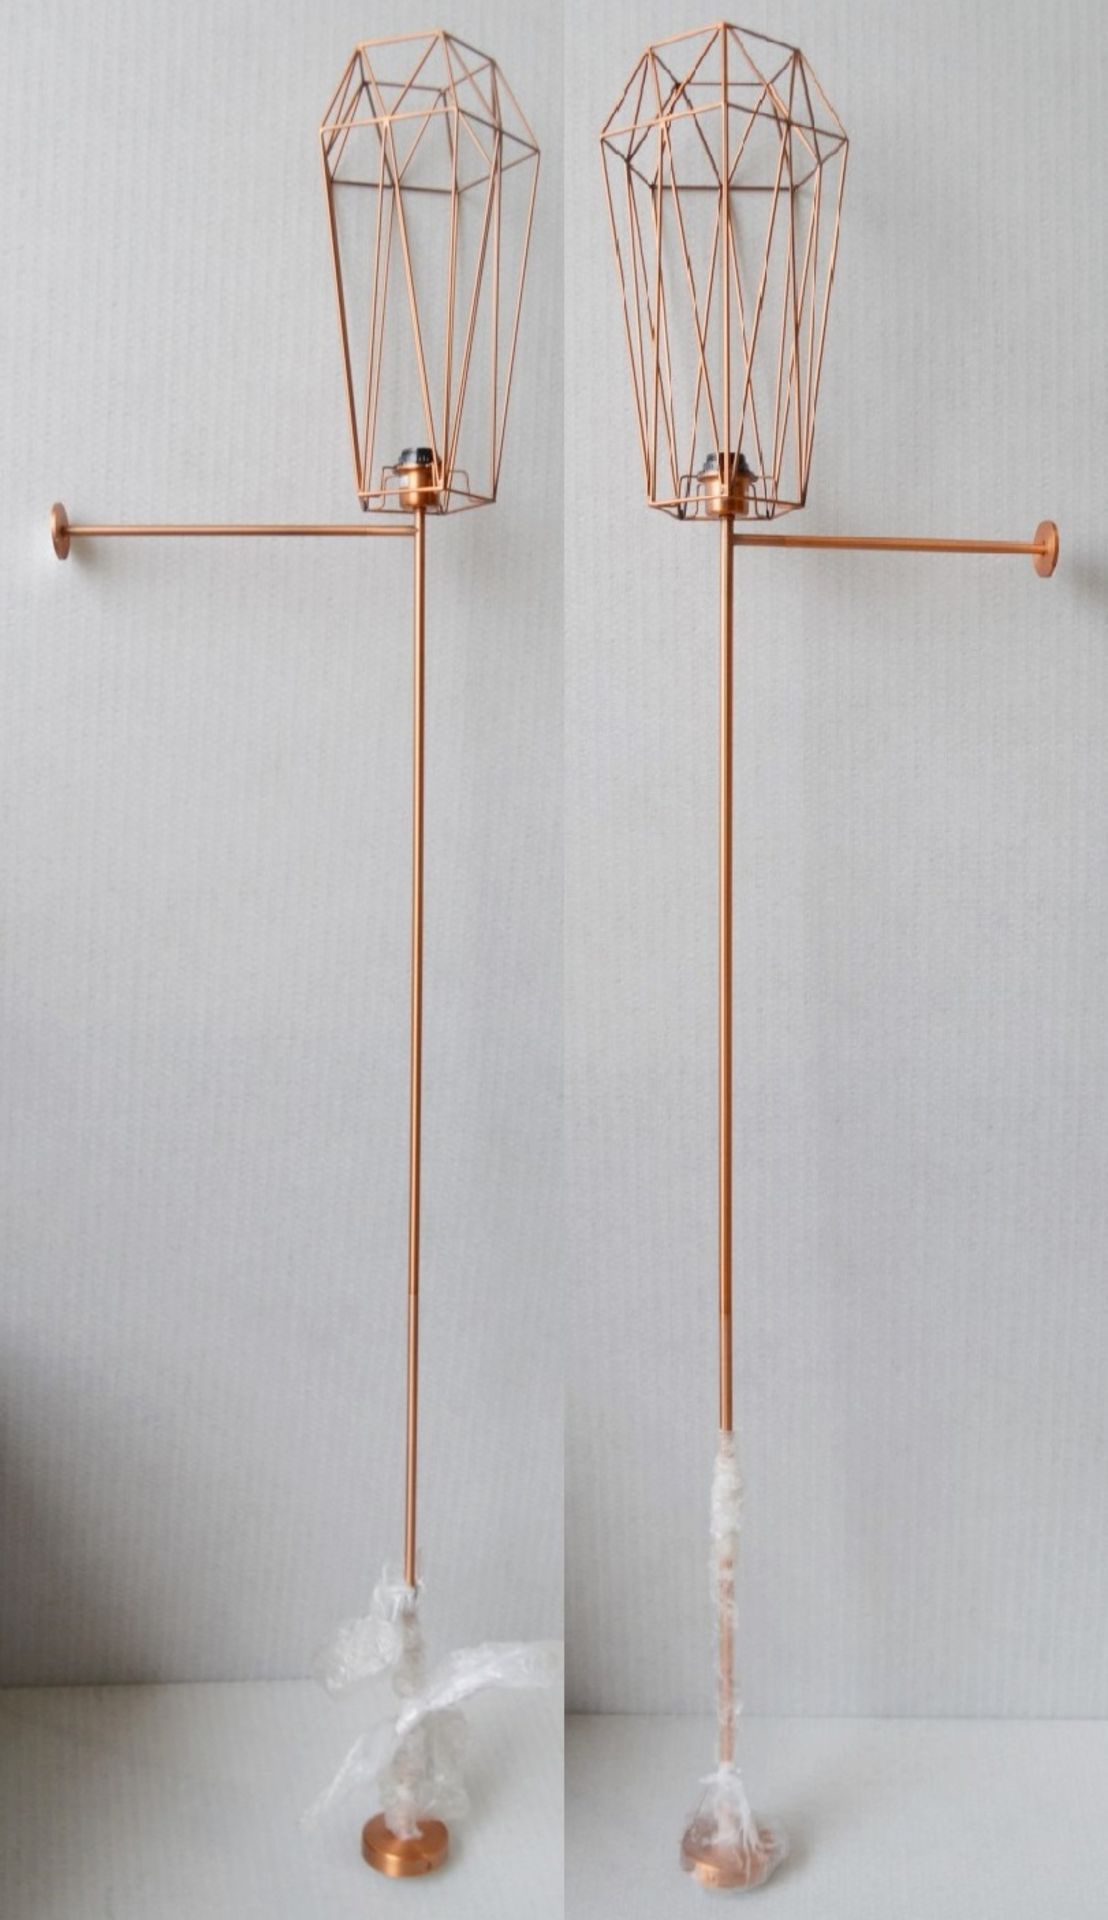 A Pair Of CHELSOM Luxury Light Fittings (2) With A Caged Shade And Polished Copper Finish - Unused